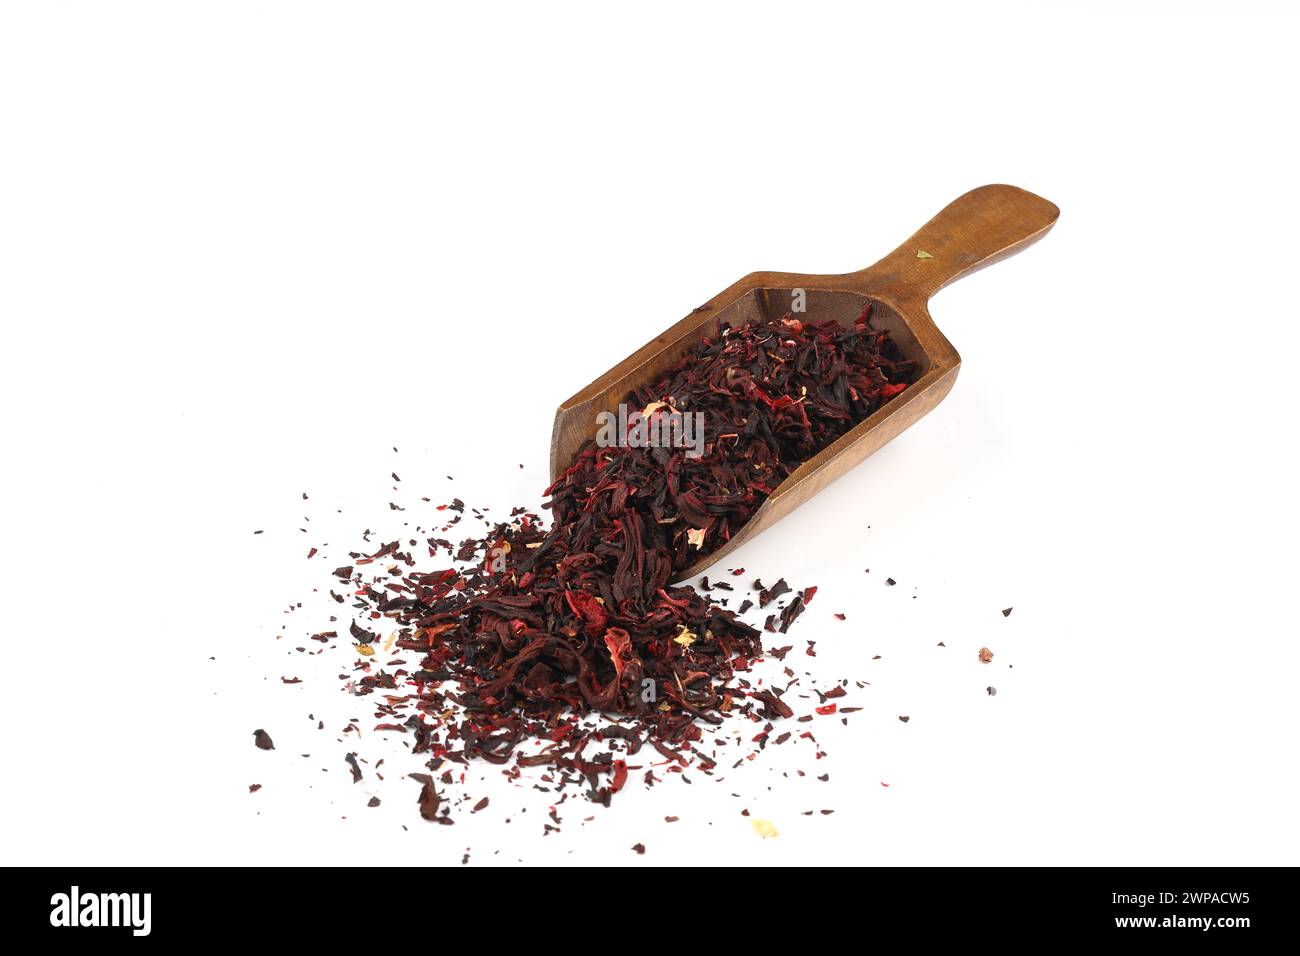 Karkade tea. Hibiscus tea leaves in wooden scoop isolated on white background. File contains clipping path. Top view. Stock Photo